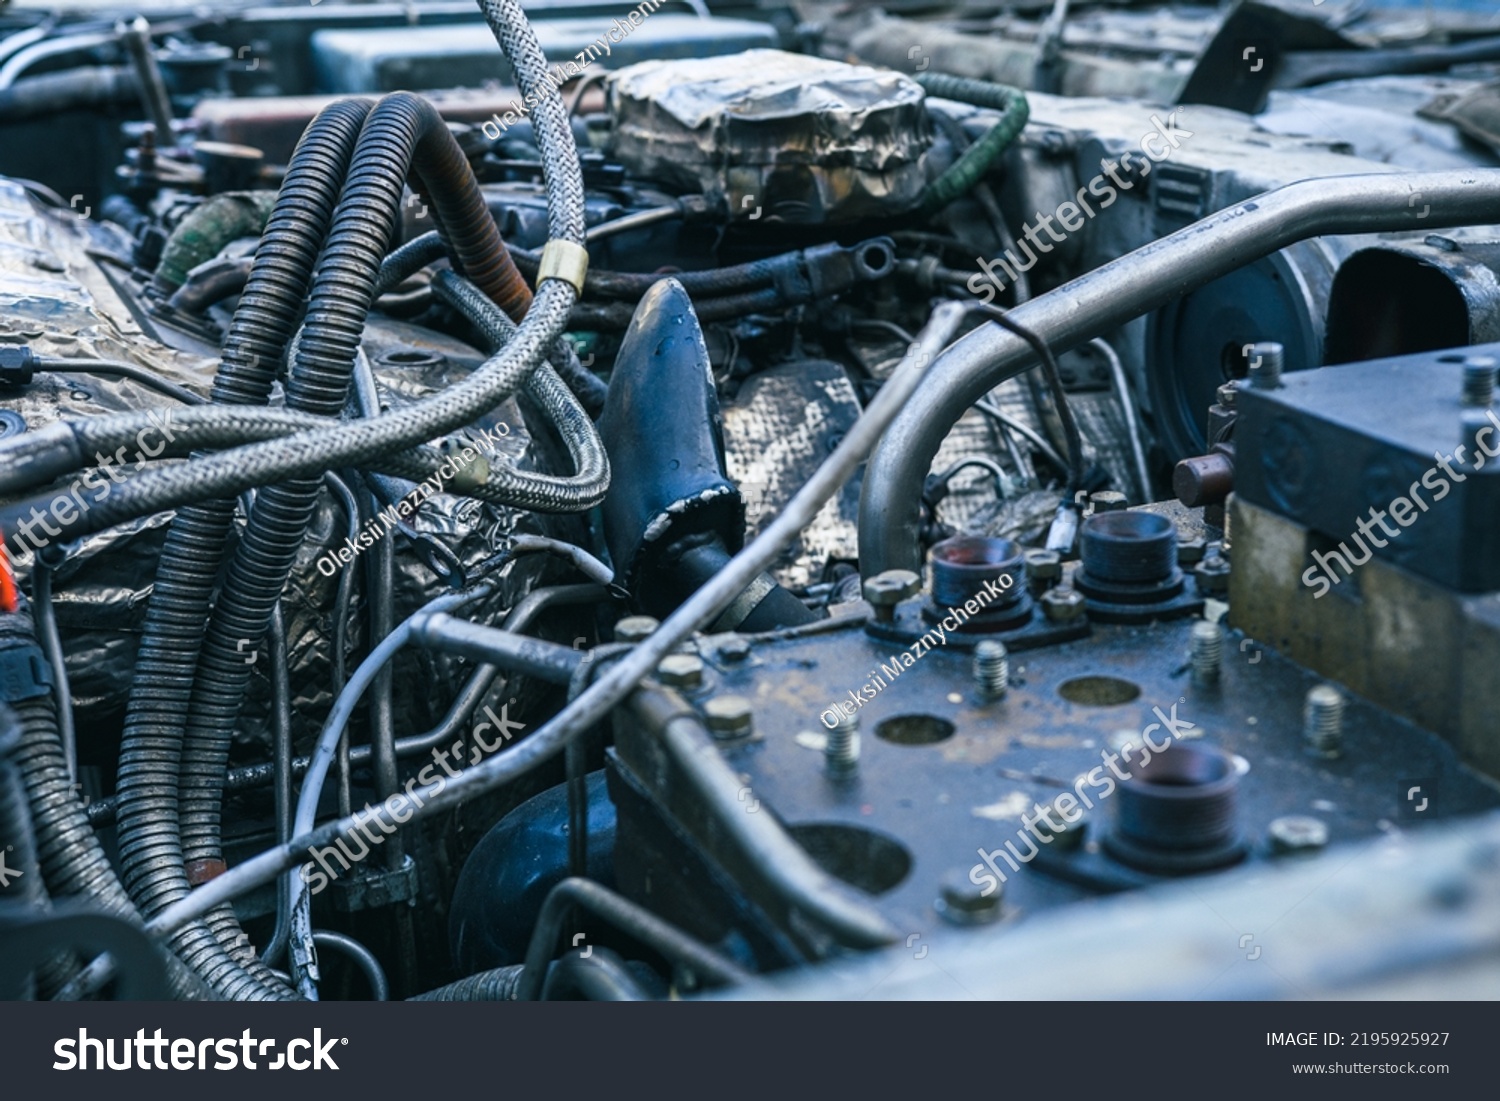 The engine and equipment of a military vehicle. Tubes, tanks and mechanisms of the propulsion system #2195925927